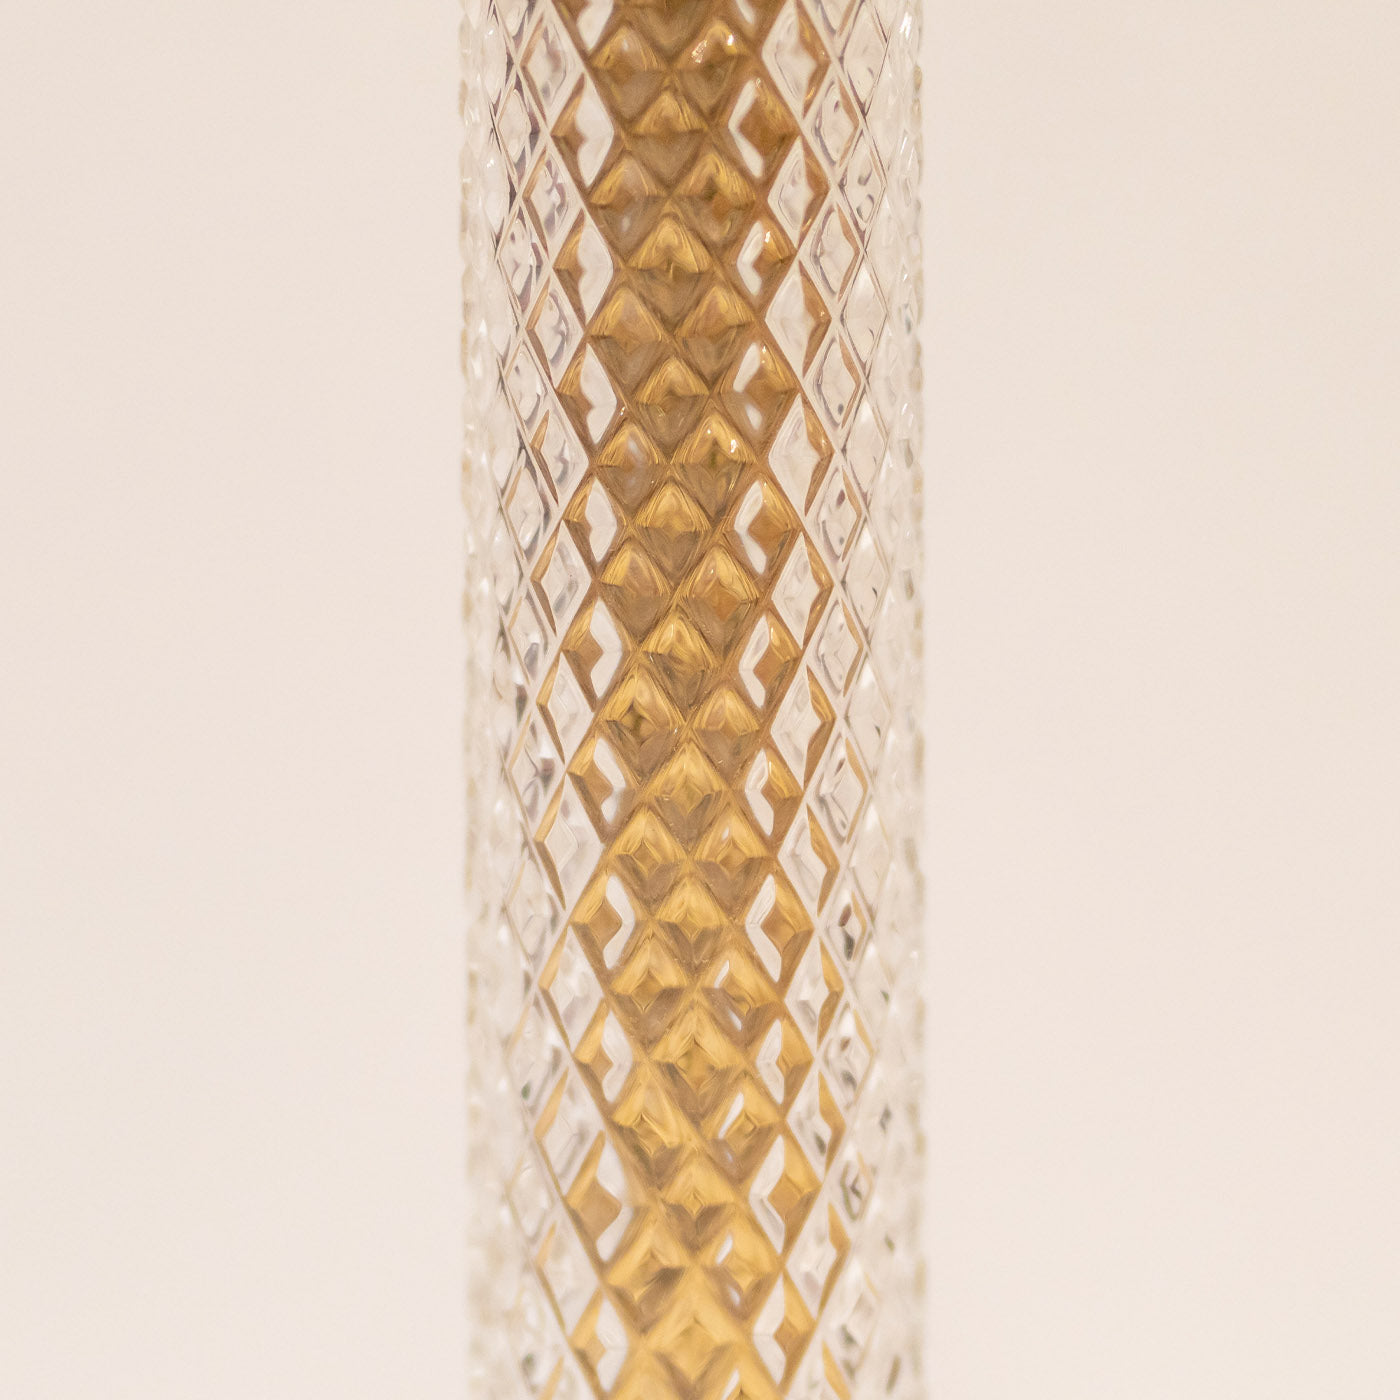 Footed Bronze & Crystal Table Lamp - Alternative view 1